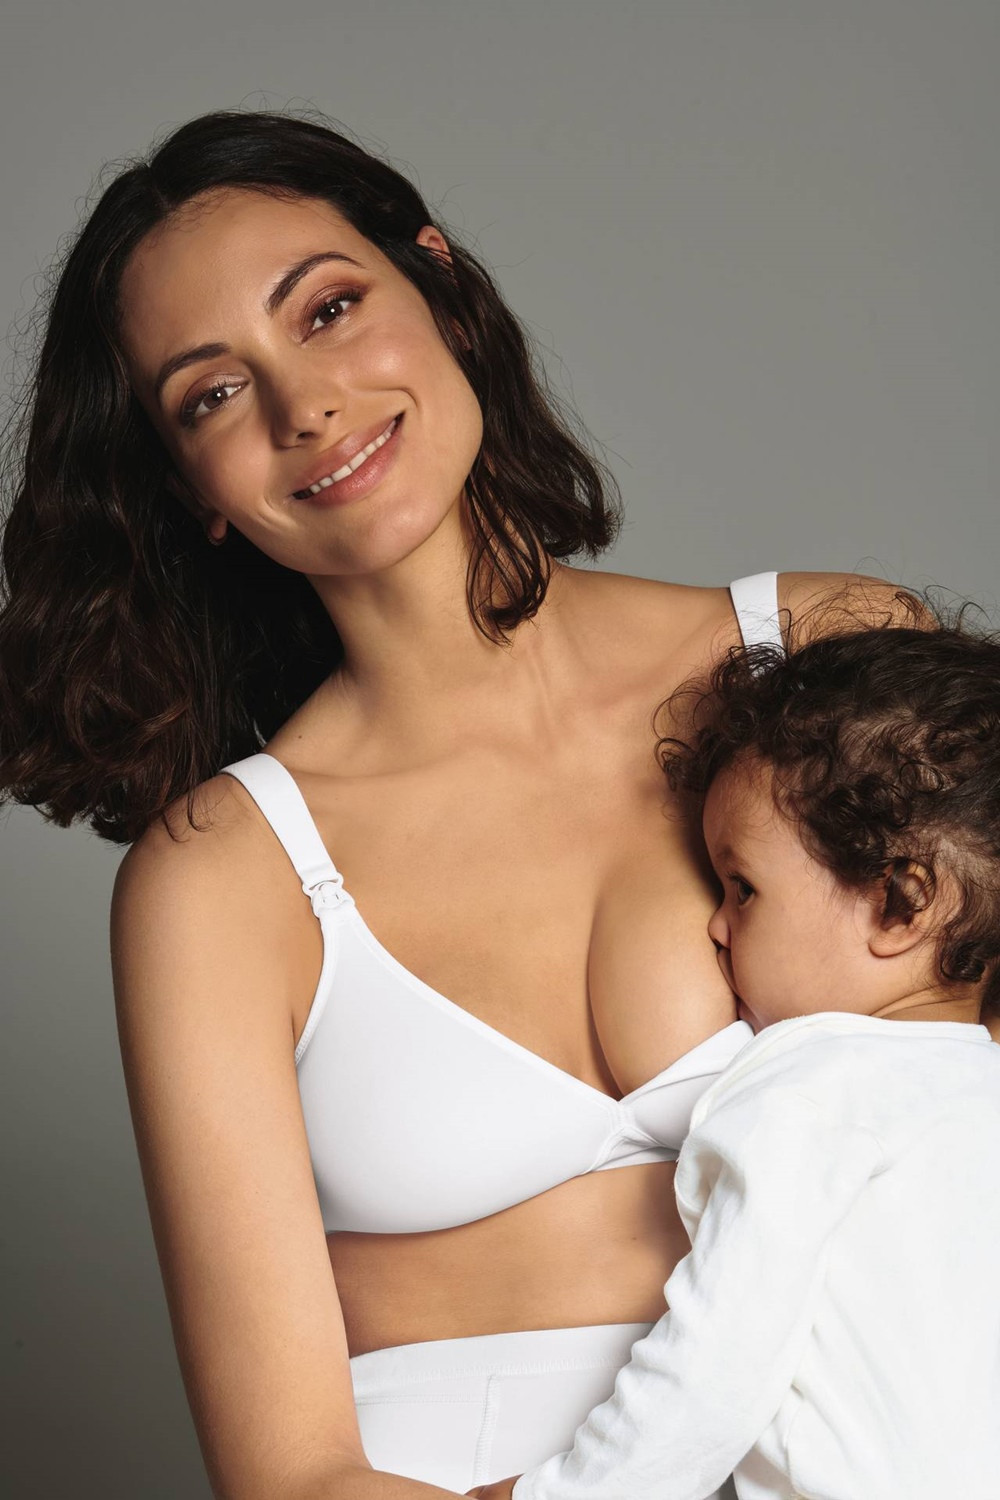 Cotton nursing bra with soft underwire that does not press the breast. Up  to J cup